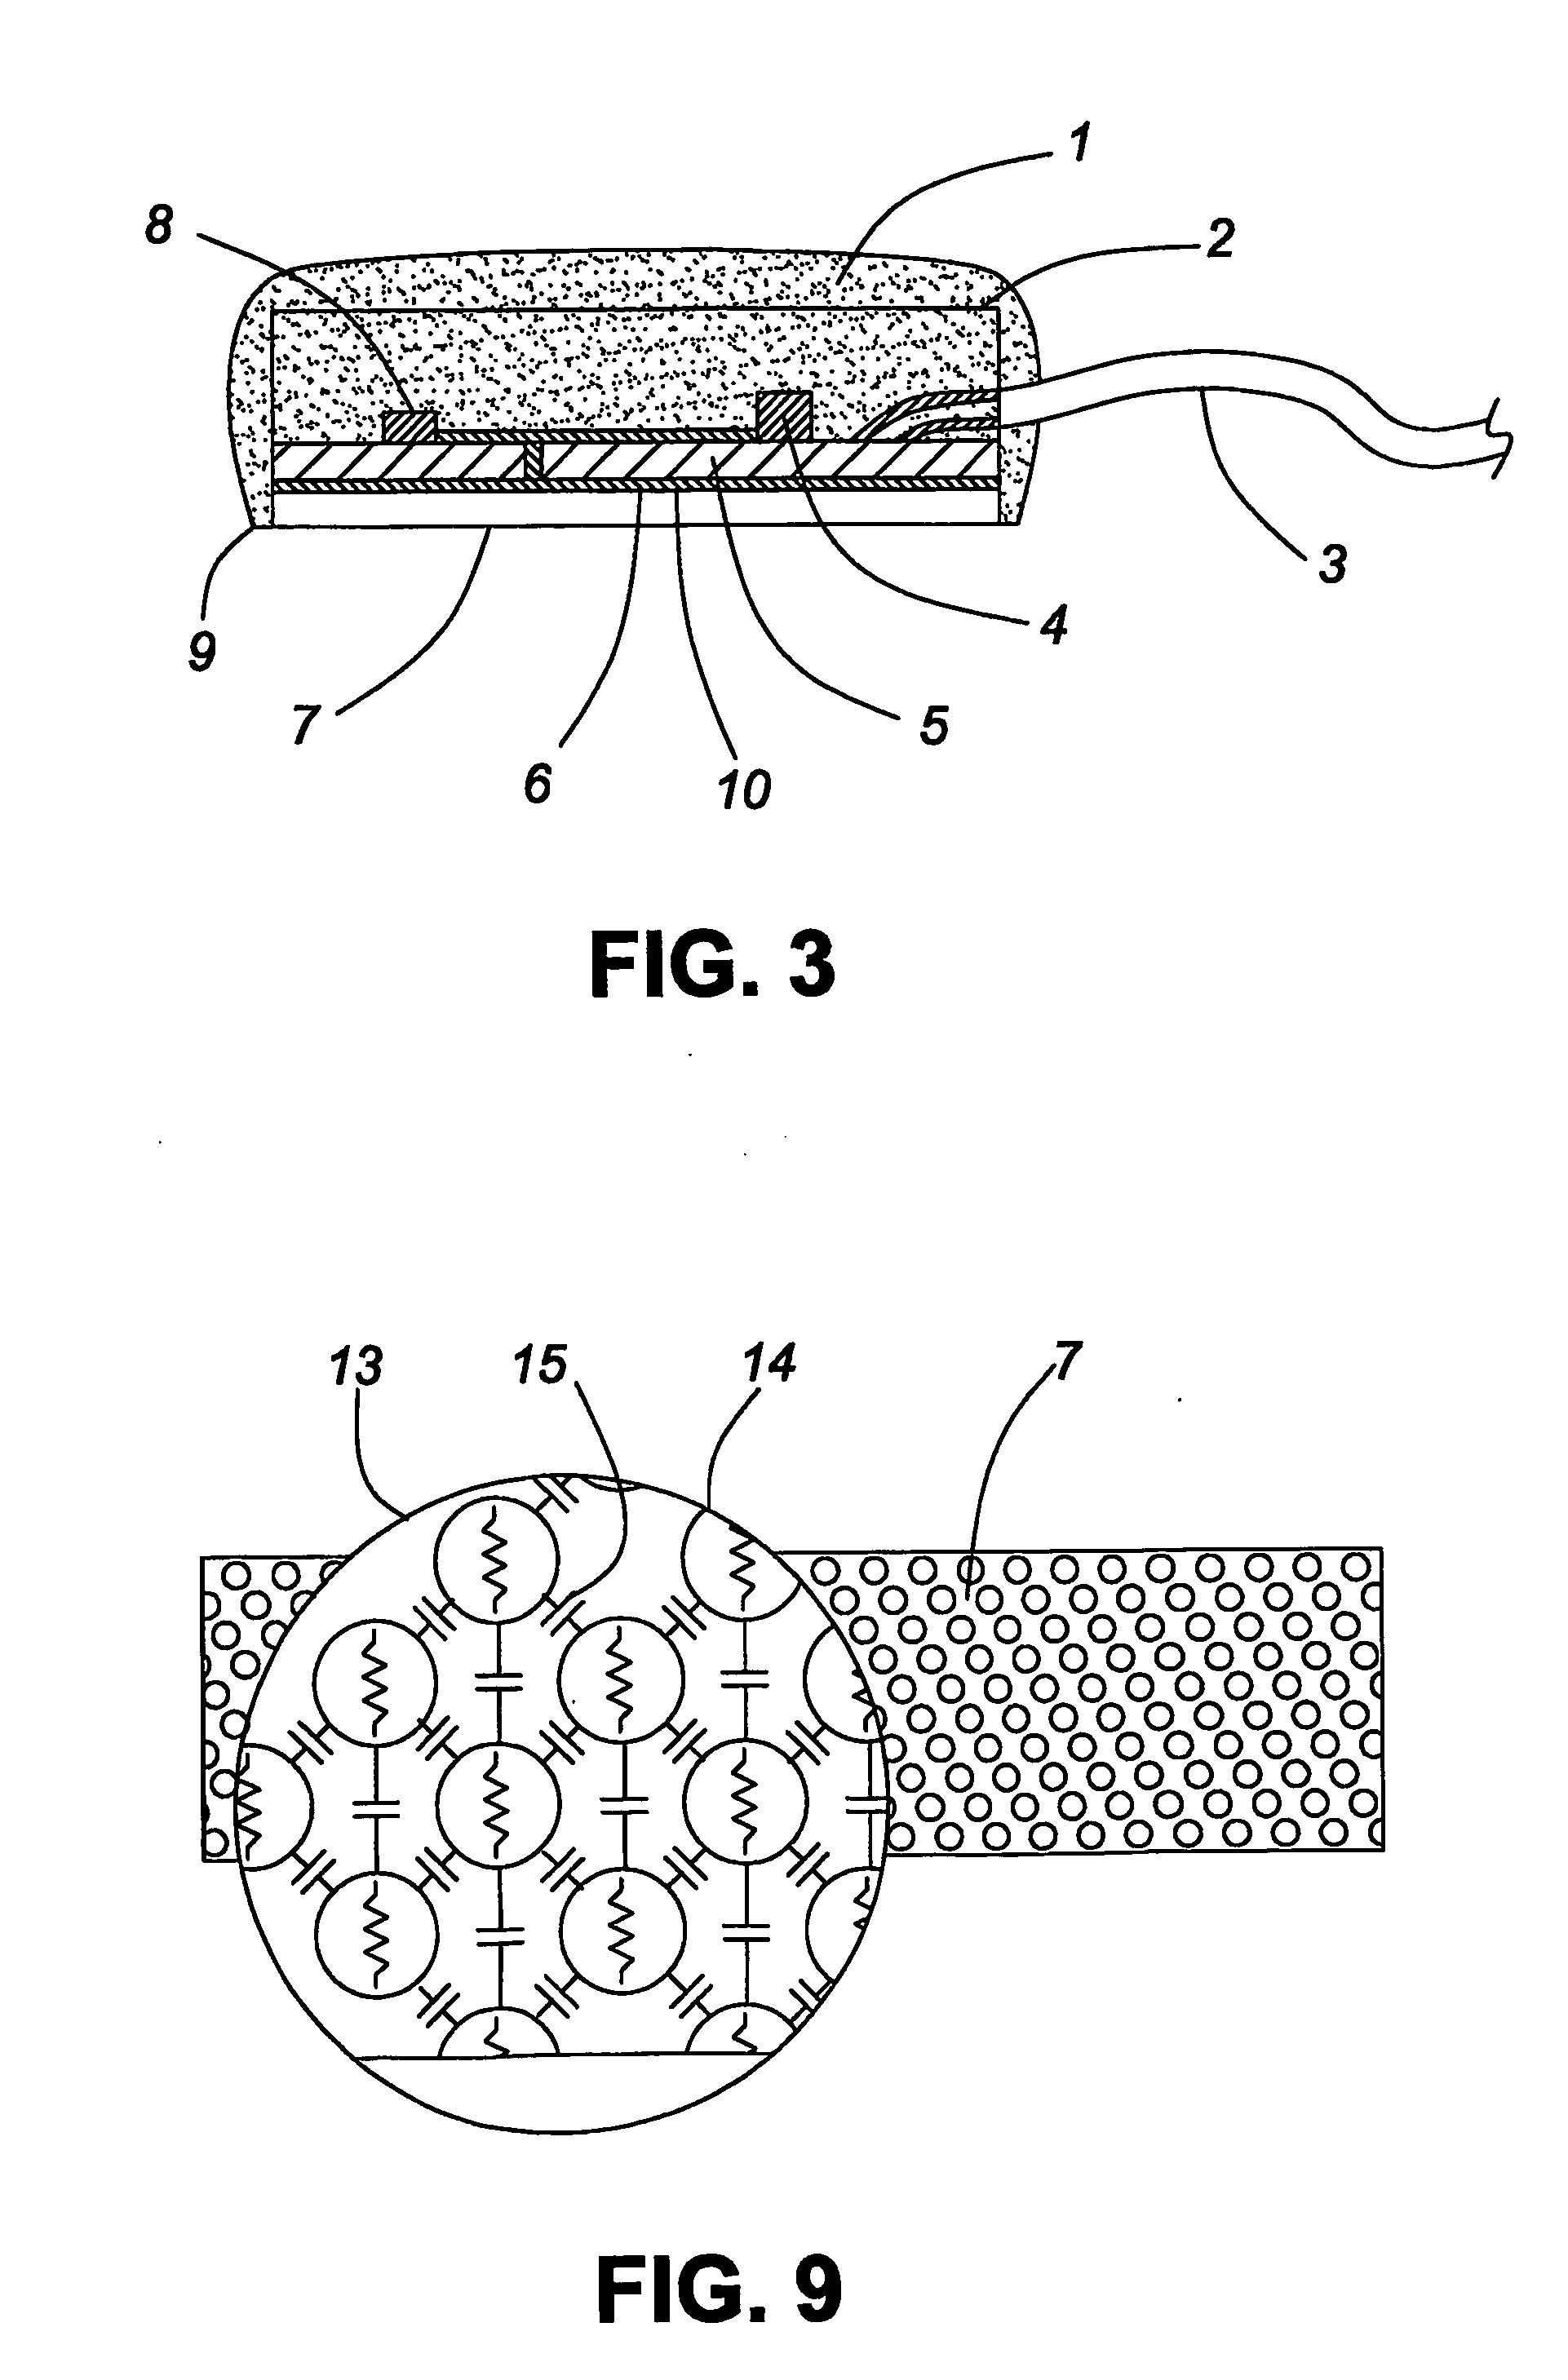 Skin impedance matched biopotential electrode